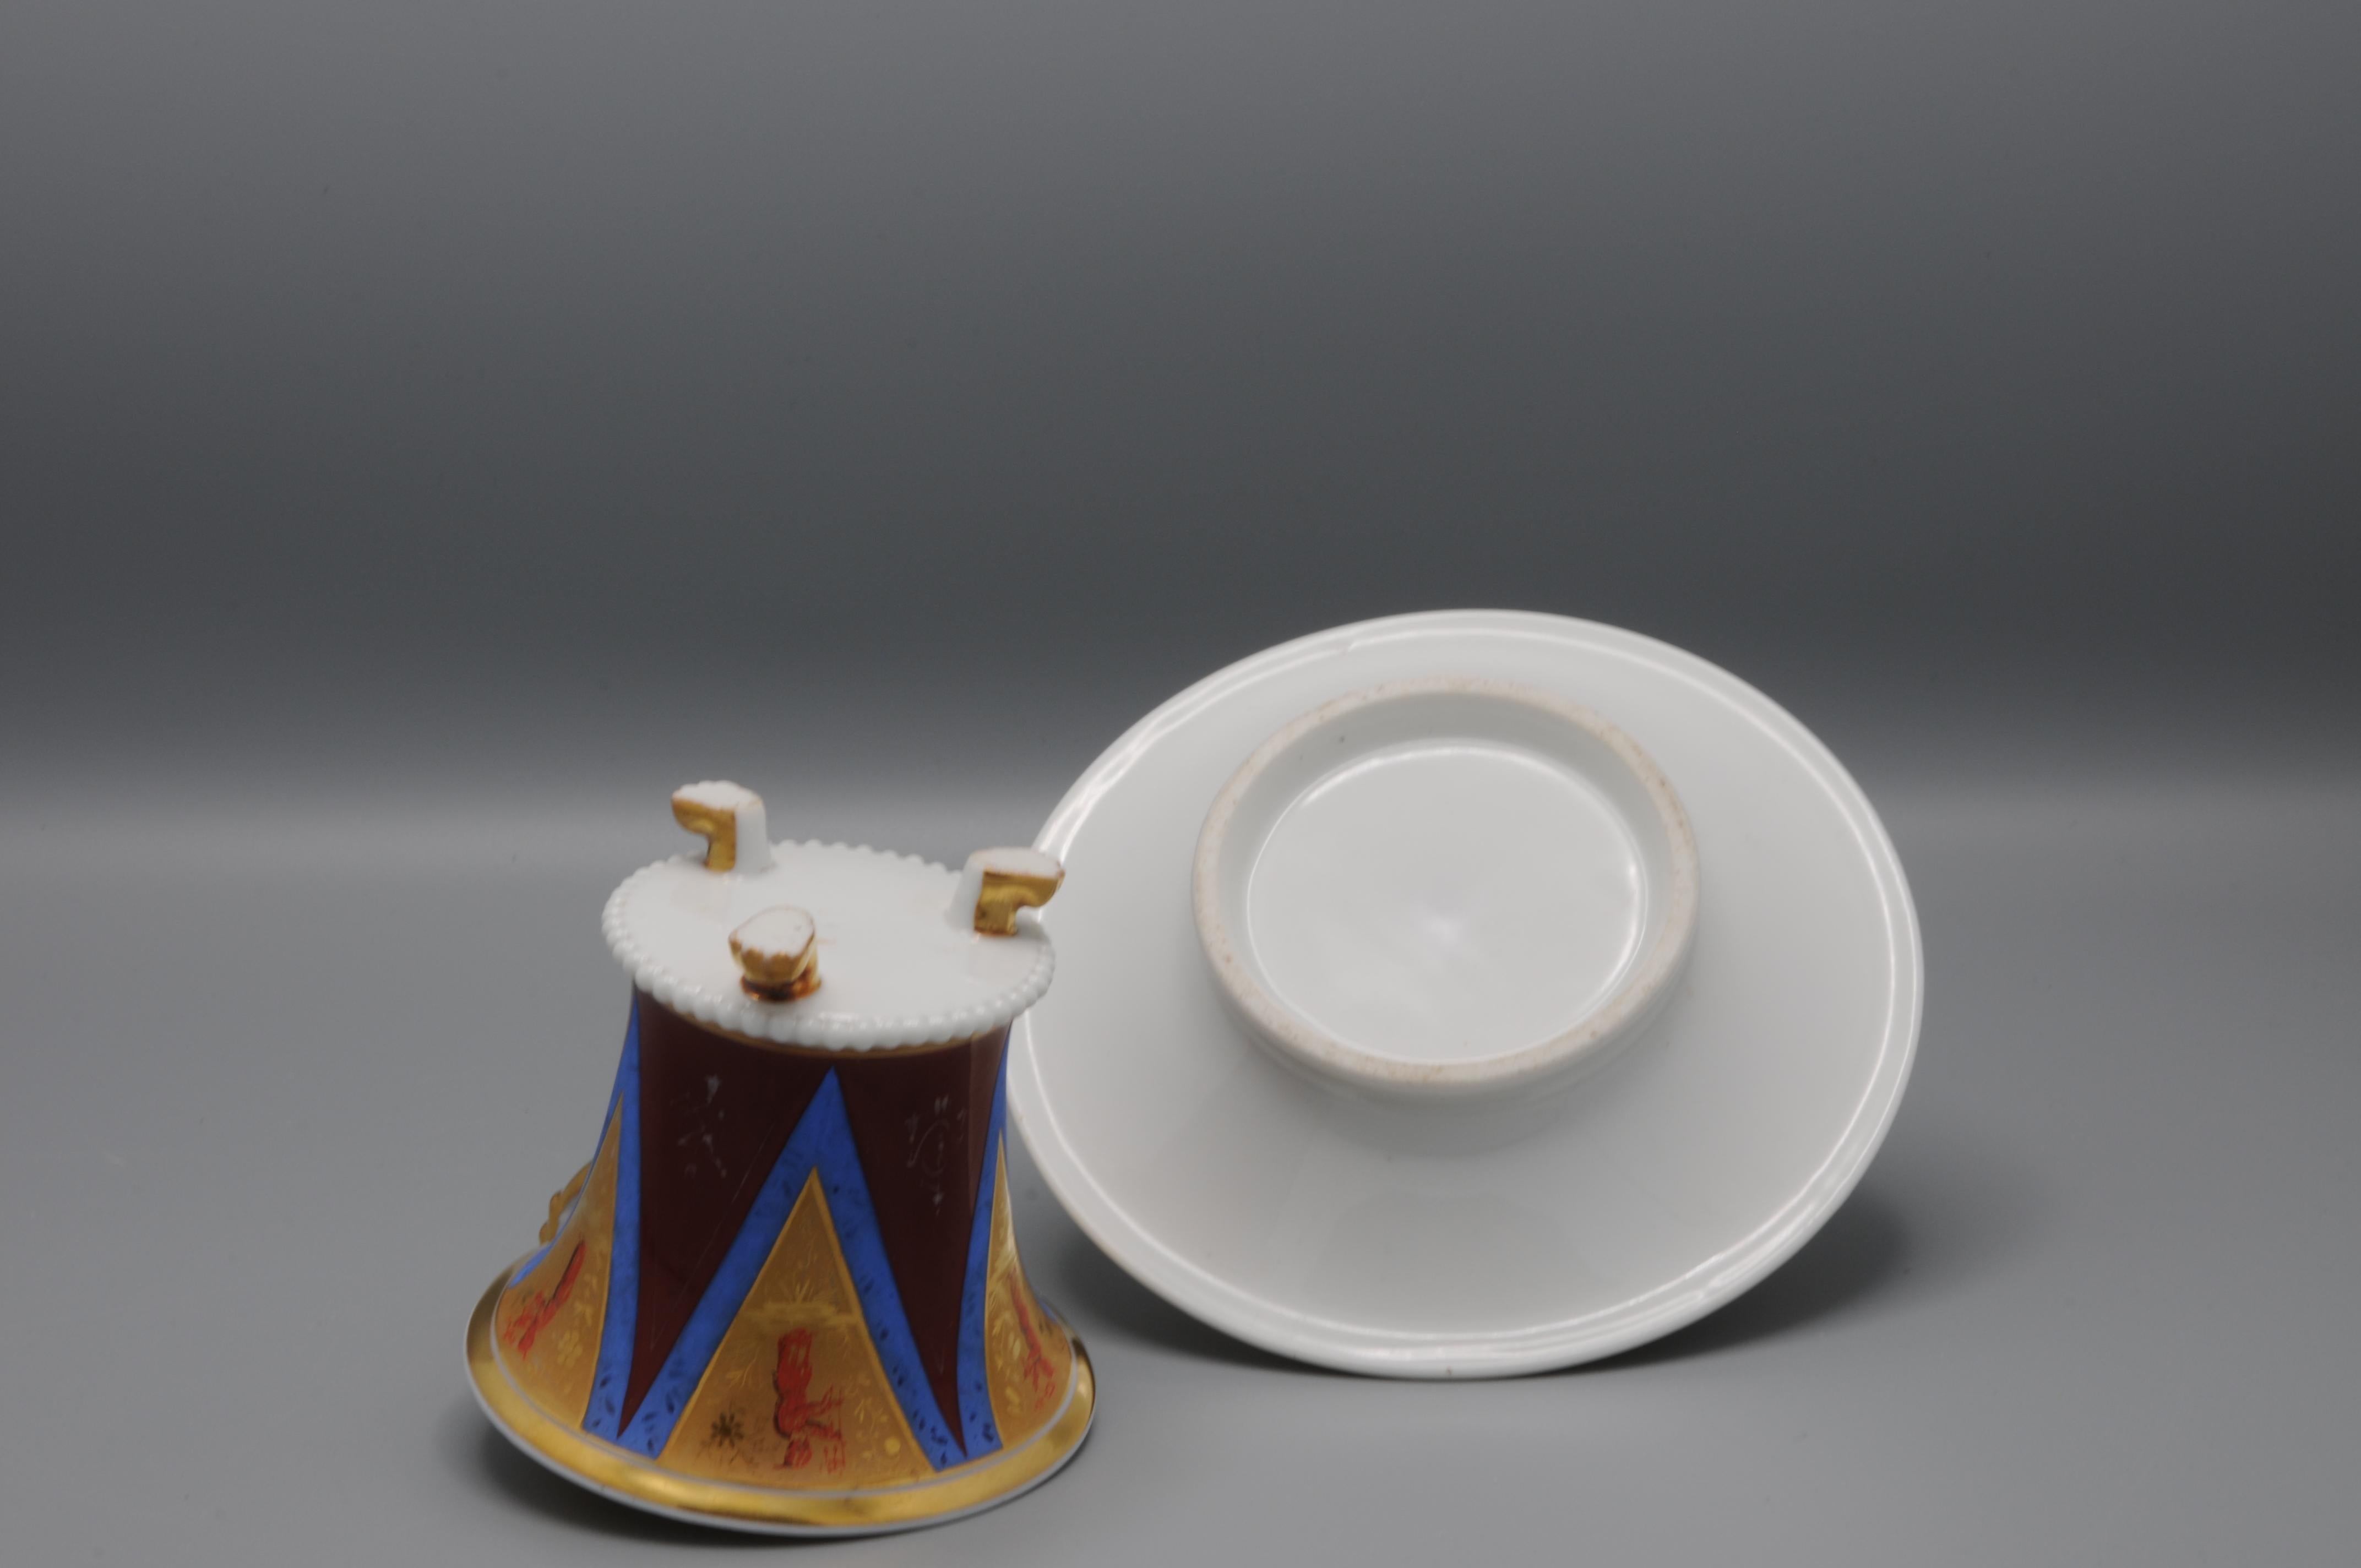 Gilt Darte Freres (?) - Cup and saucer, chinoiserie decoration, early 19th century For Sale